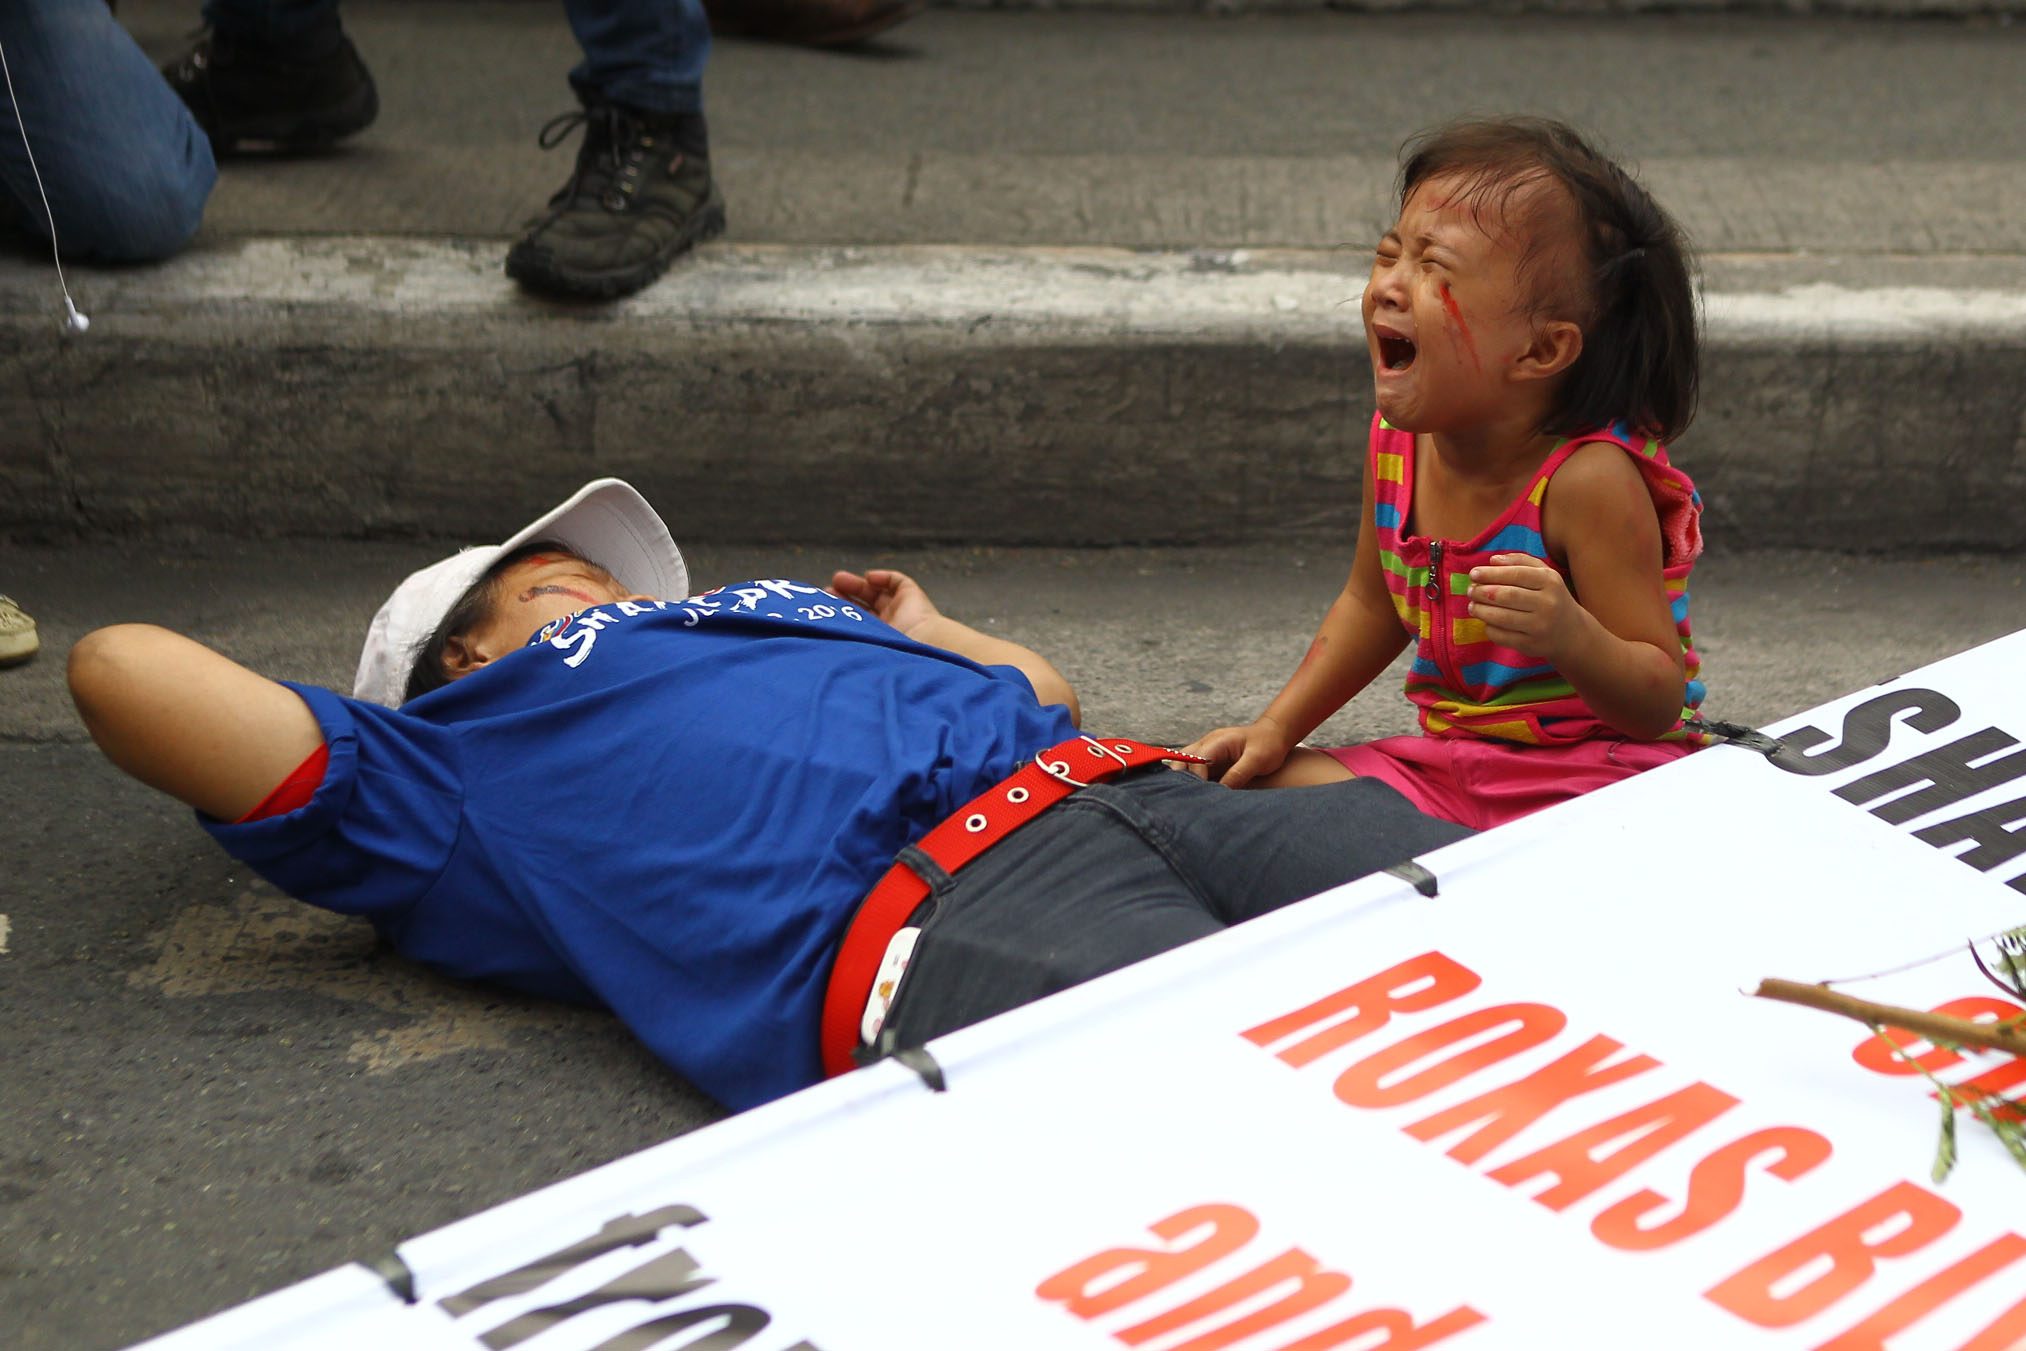 IN PHOTOS: Moving scenes from #Pagyanig, #MMShakeDrill